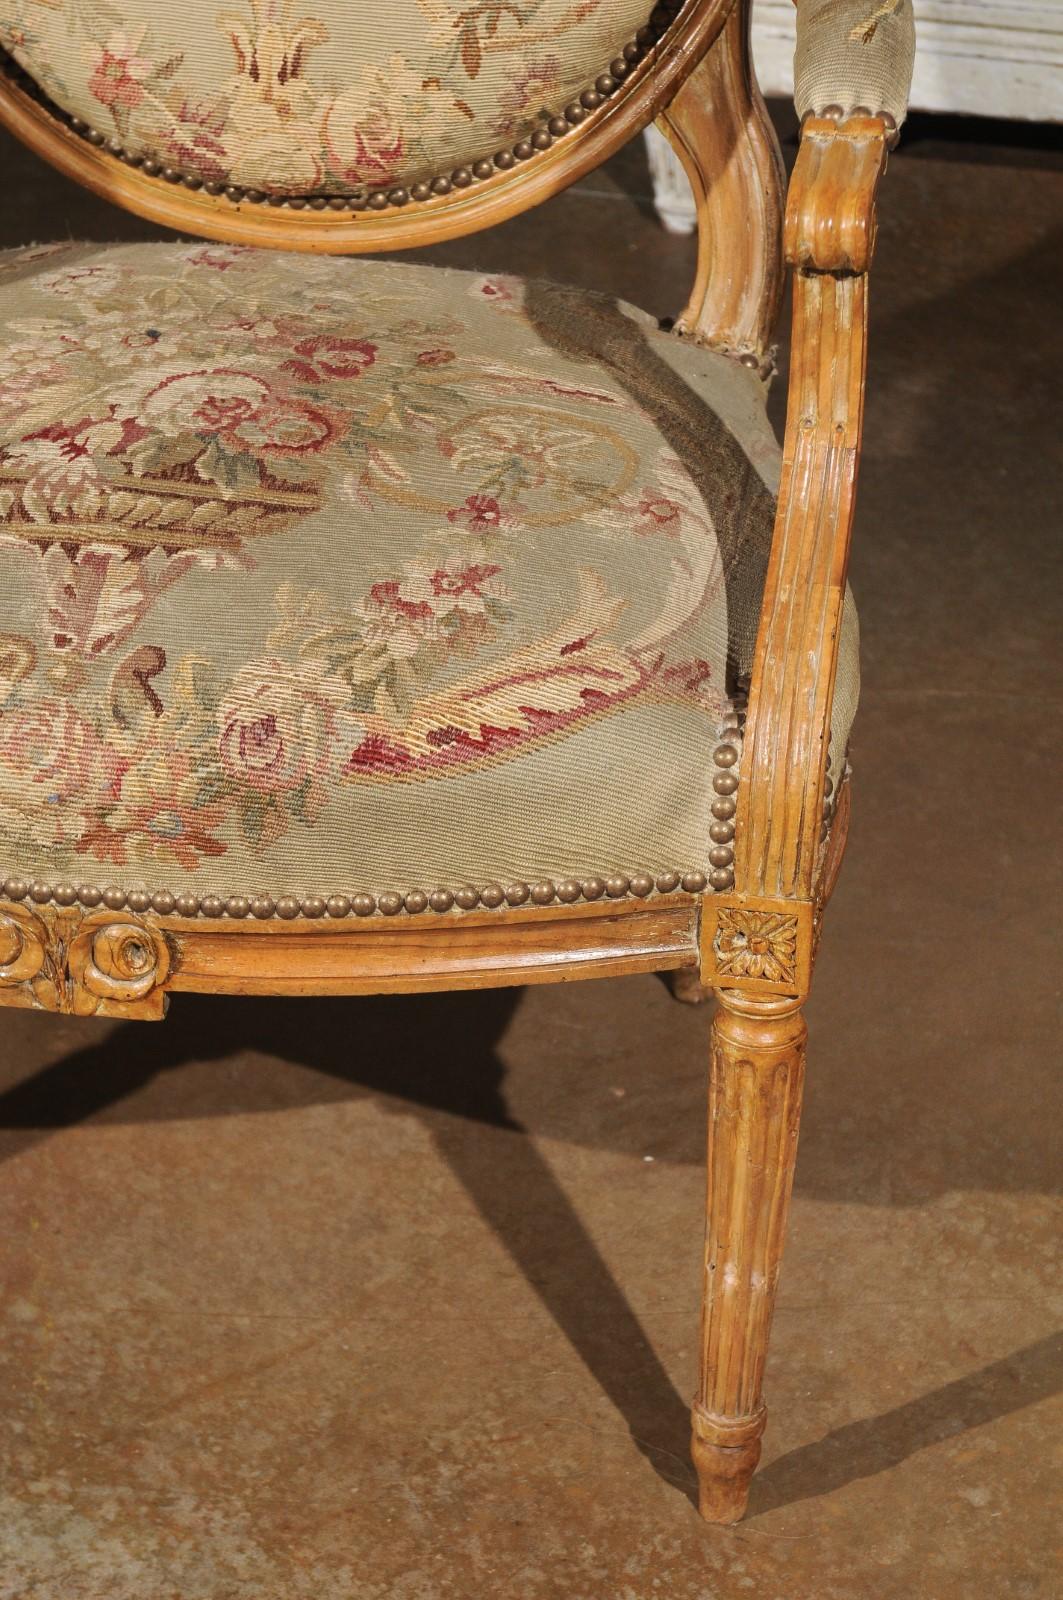 French Louis XVI Period 18th Century Armchair with Floral Tapestry Upholstery For Sale 6